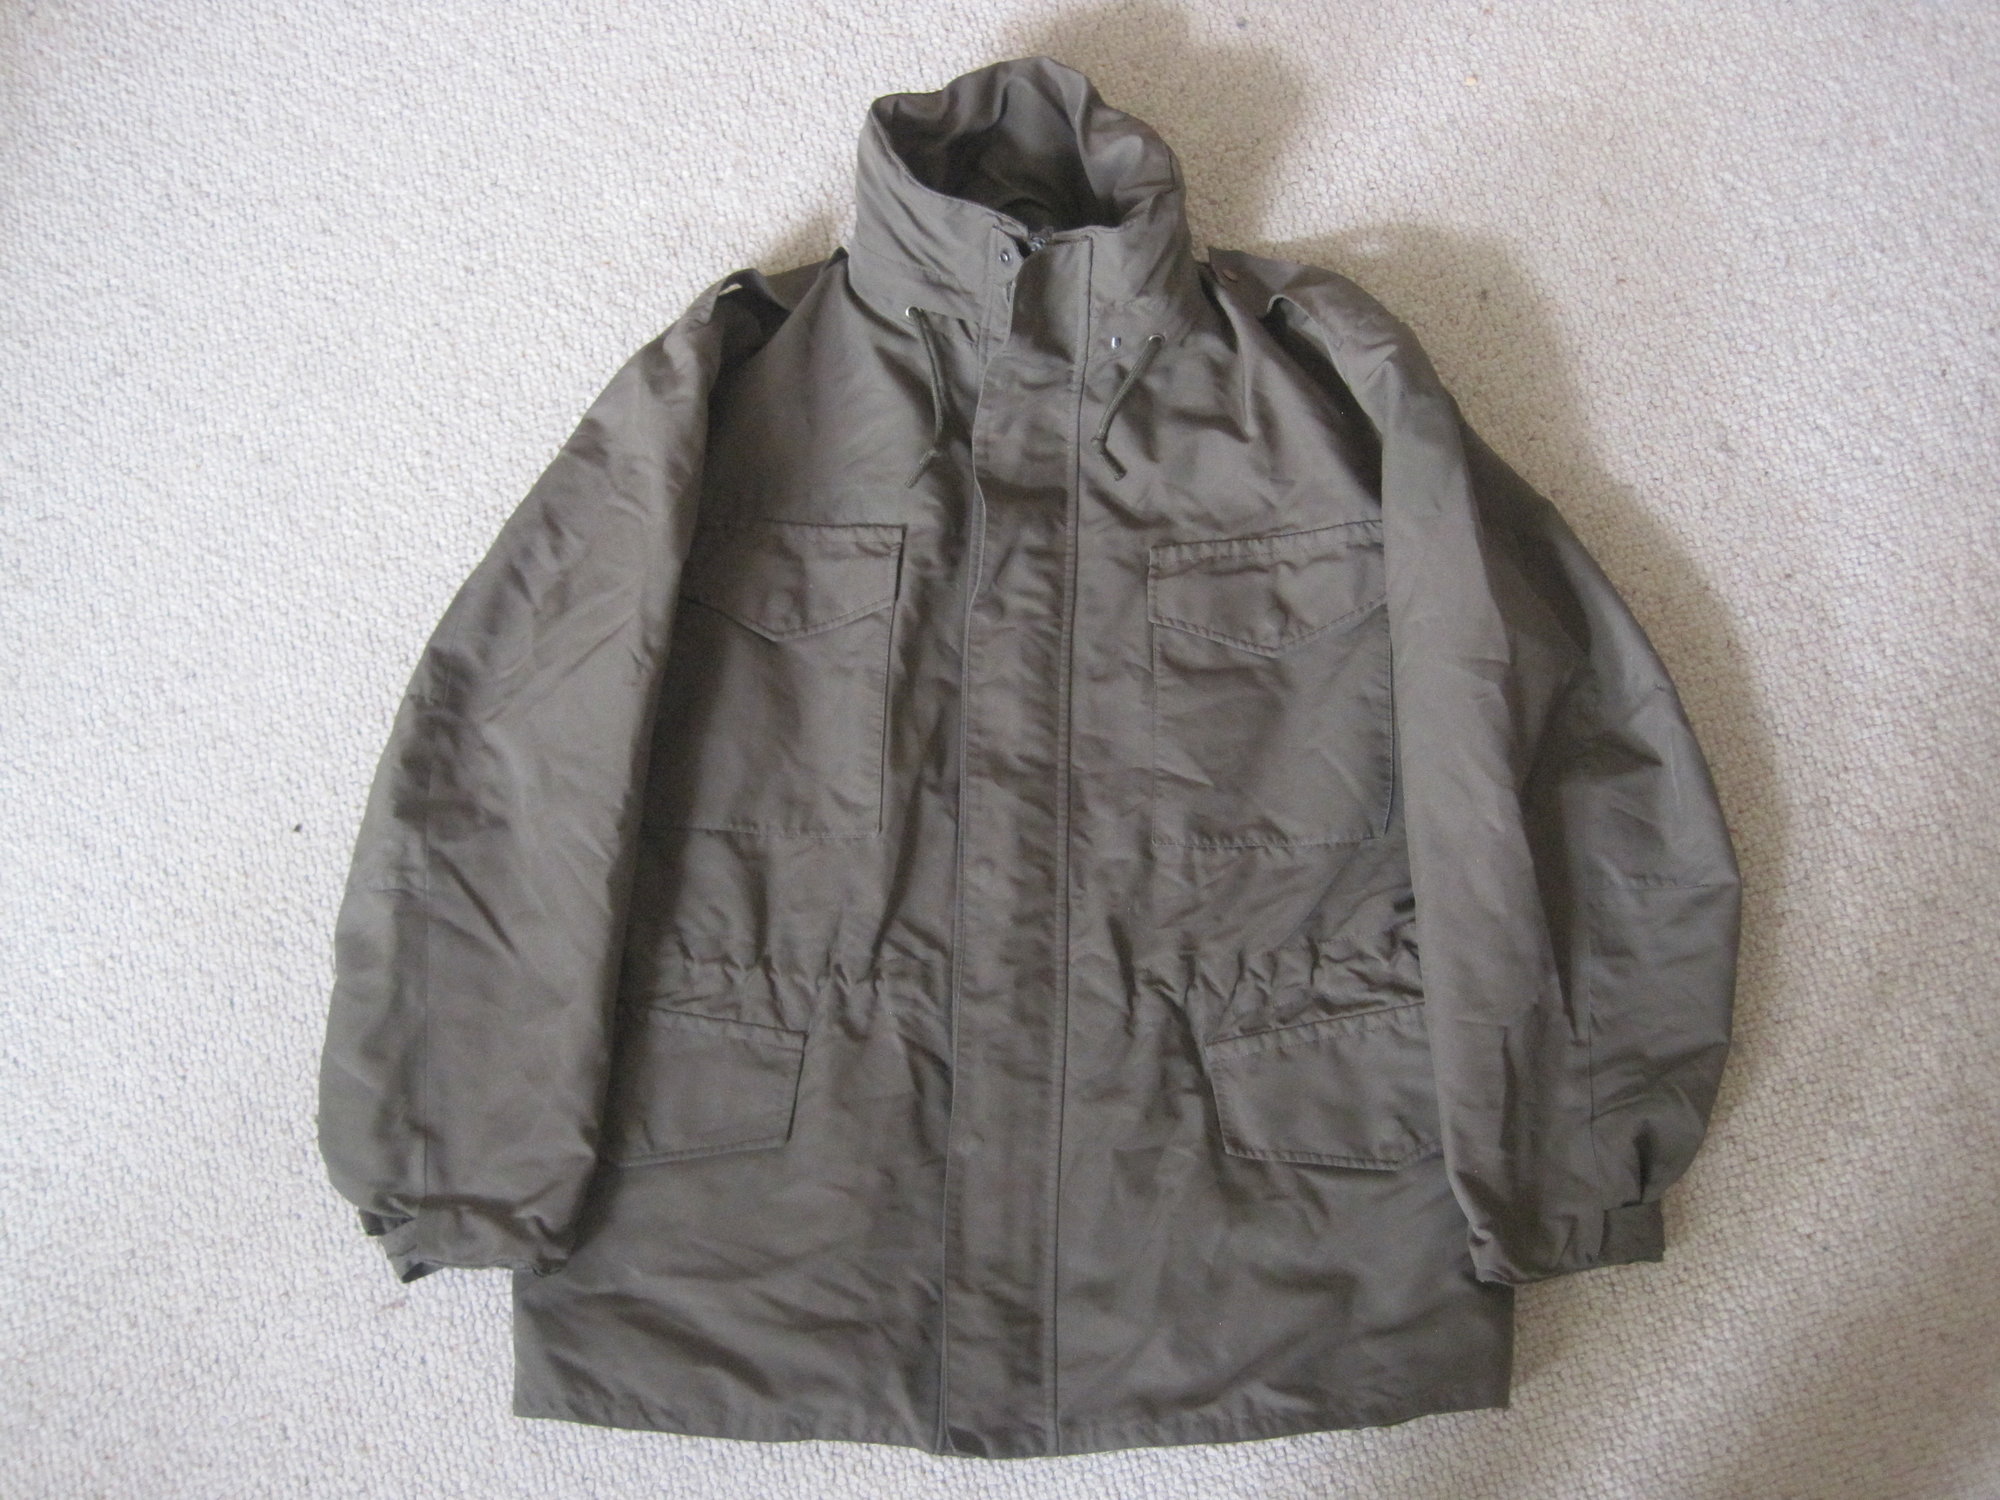 Austrian Army M65 Gore-Tex jacket. Size M. 1998 - Gear - Airsoft Forums UK